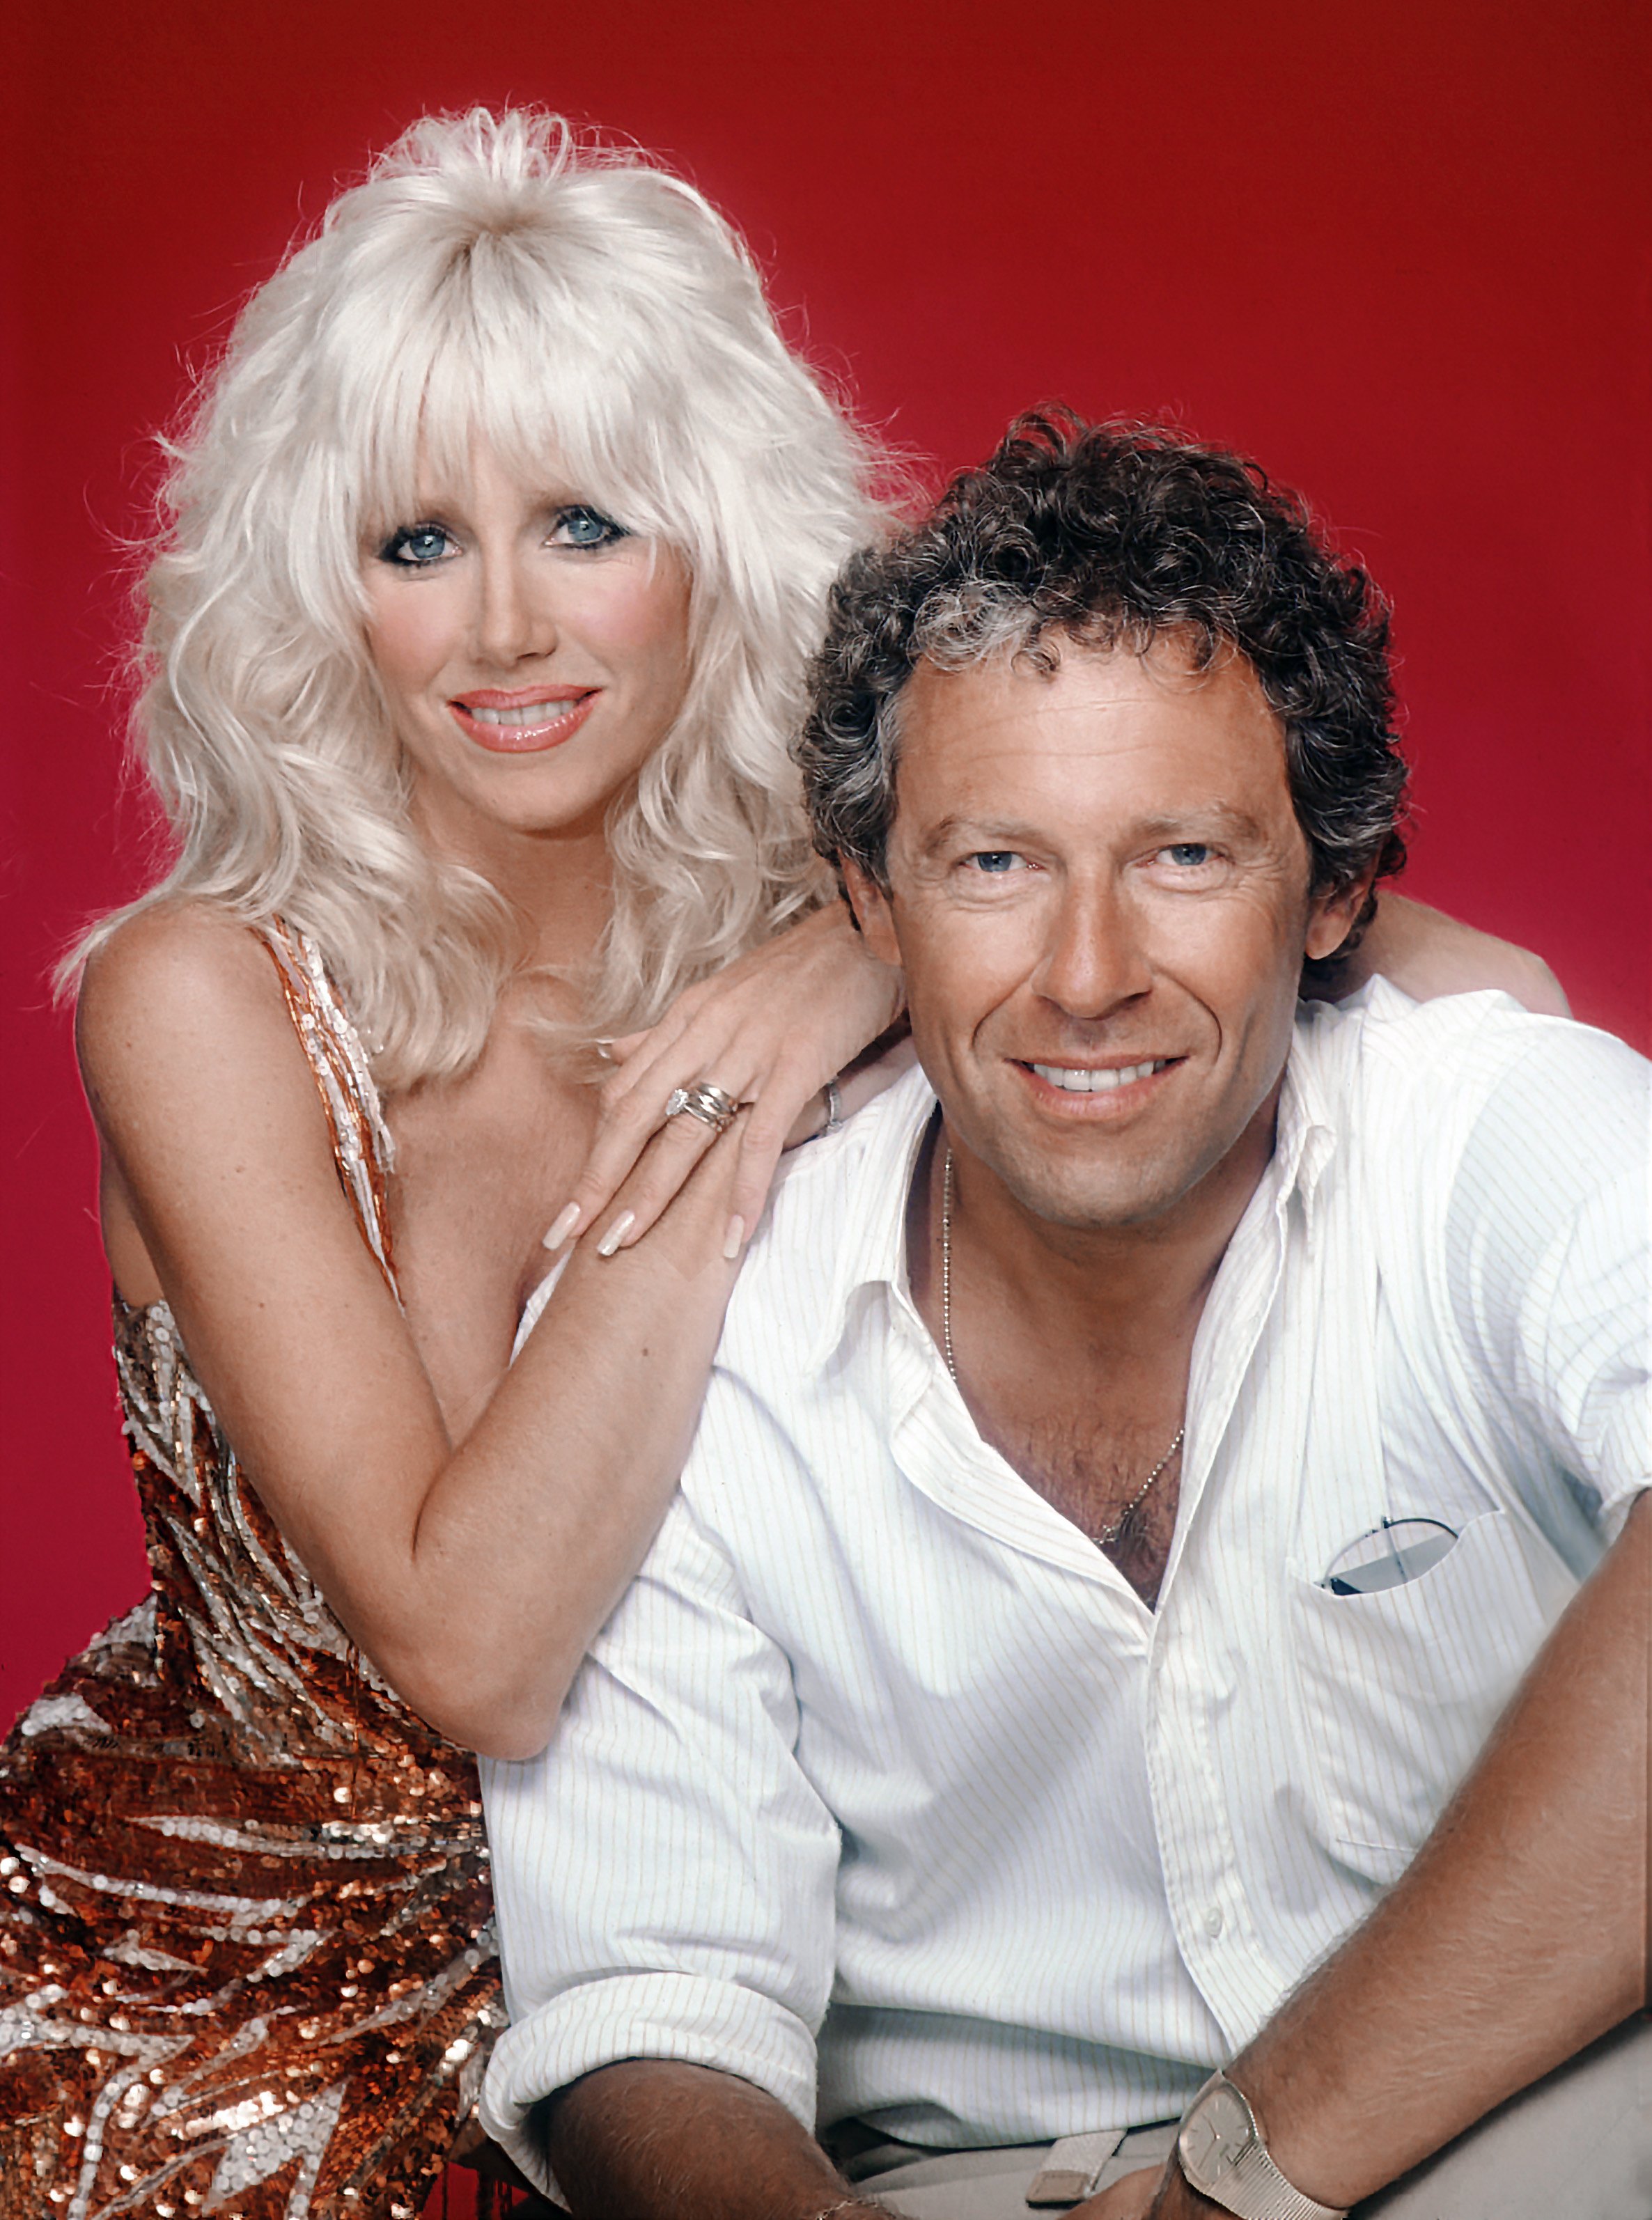 Publicity portrait of Suzanne Somers and Alan Hamel, 1980 | Source: Getty Images